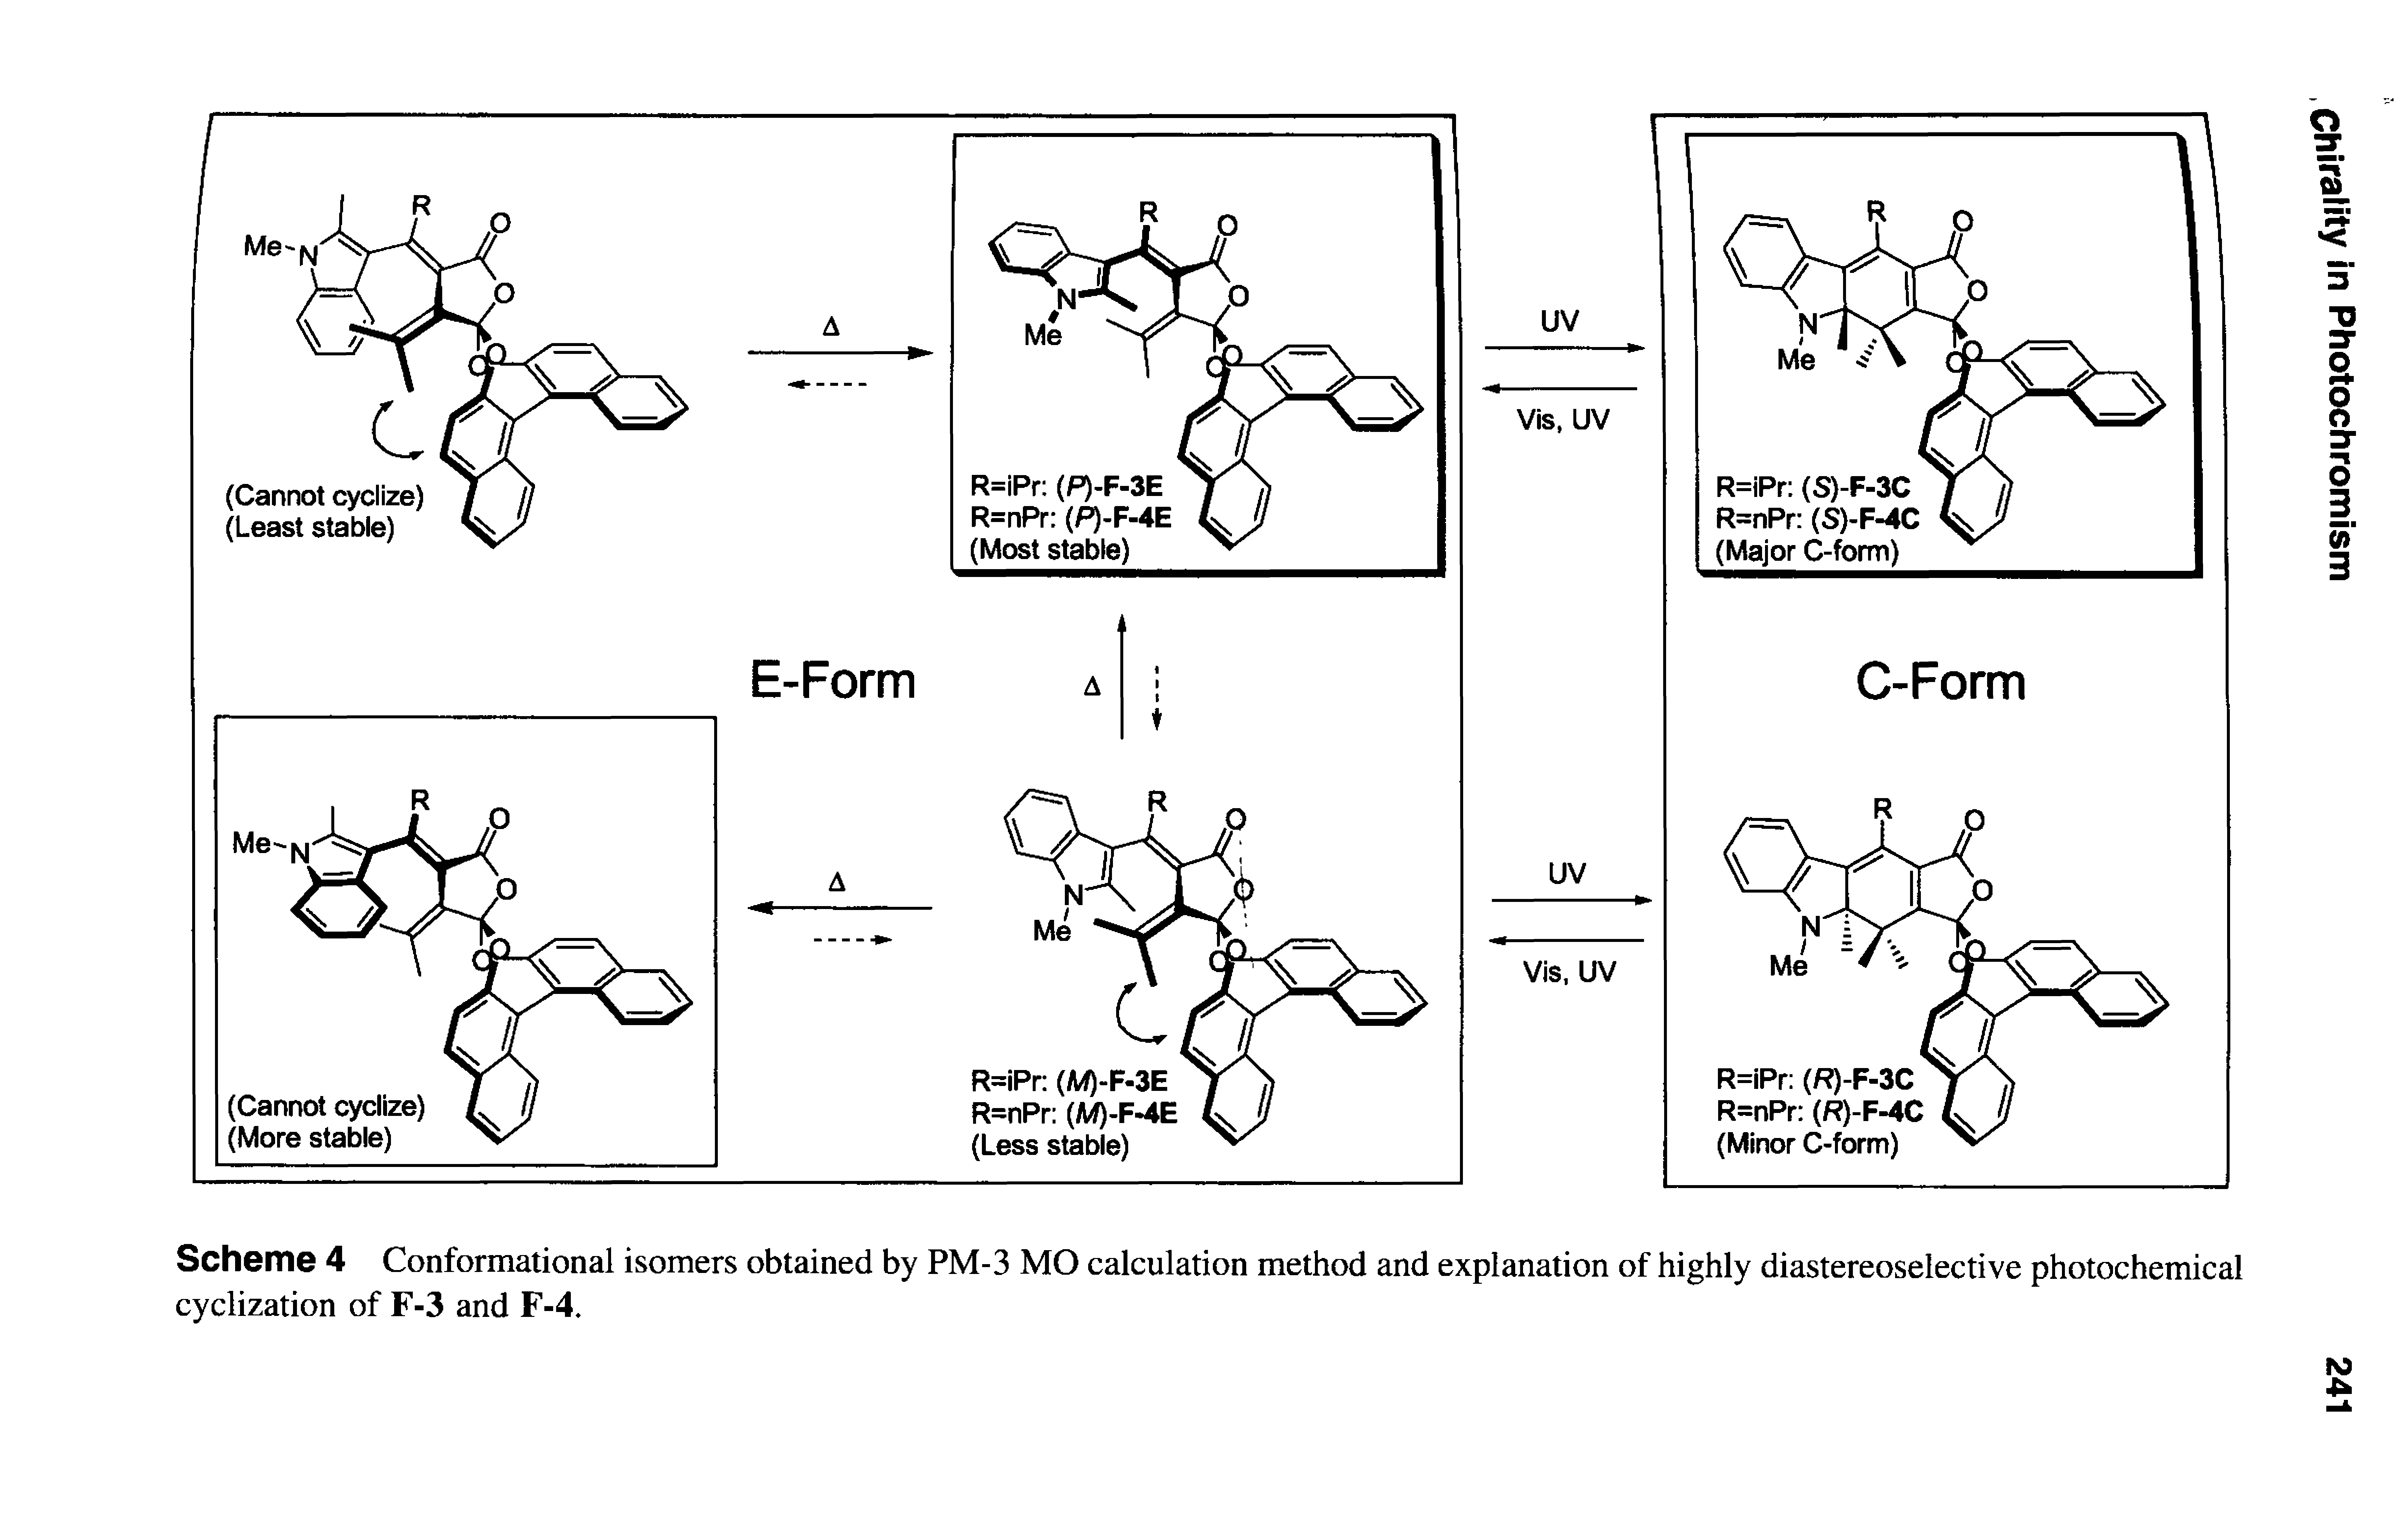 Scheme 4 Conformational isomers obtained by PM-3 MO calculation method and explanation of highly diastereoselective photochemical cyclization of F-3 and F-4.